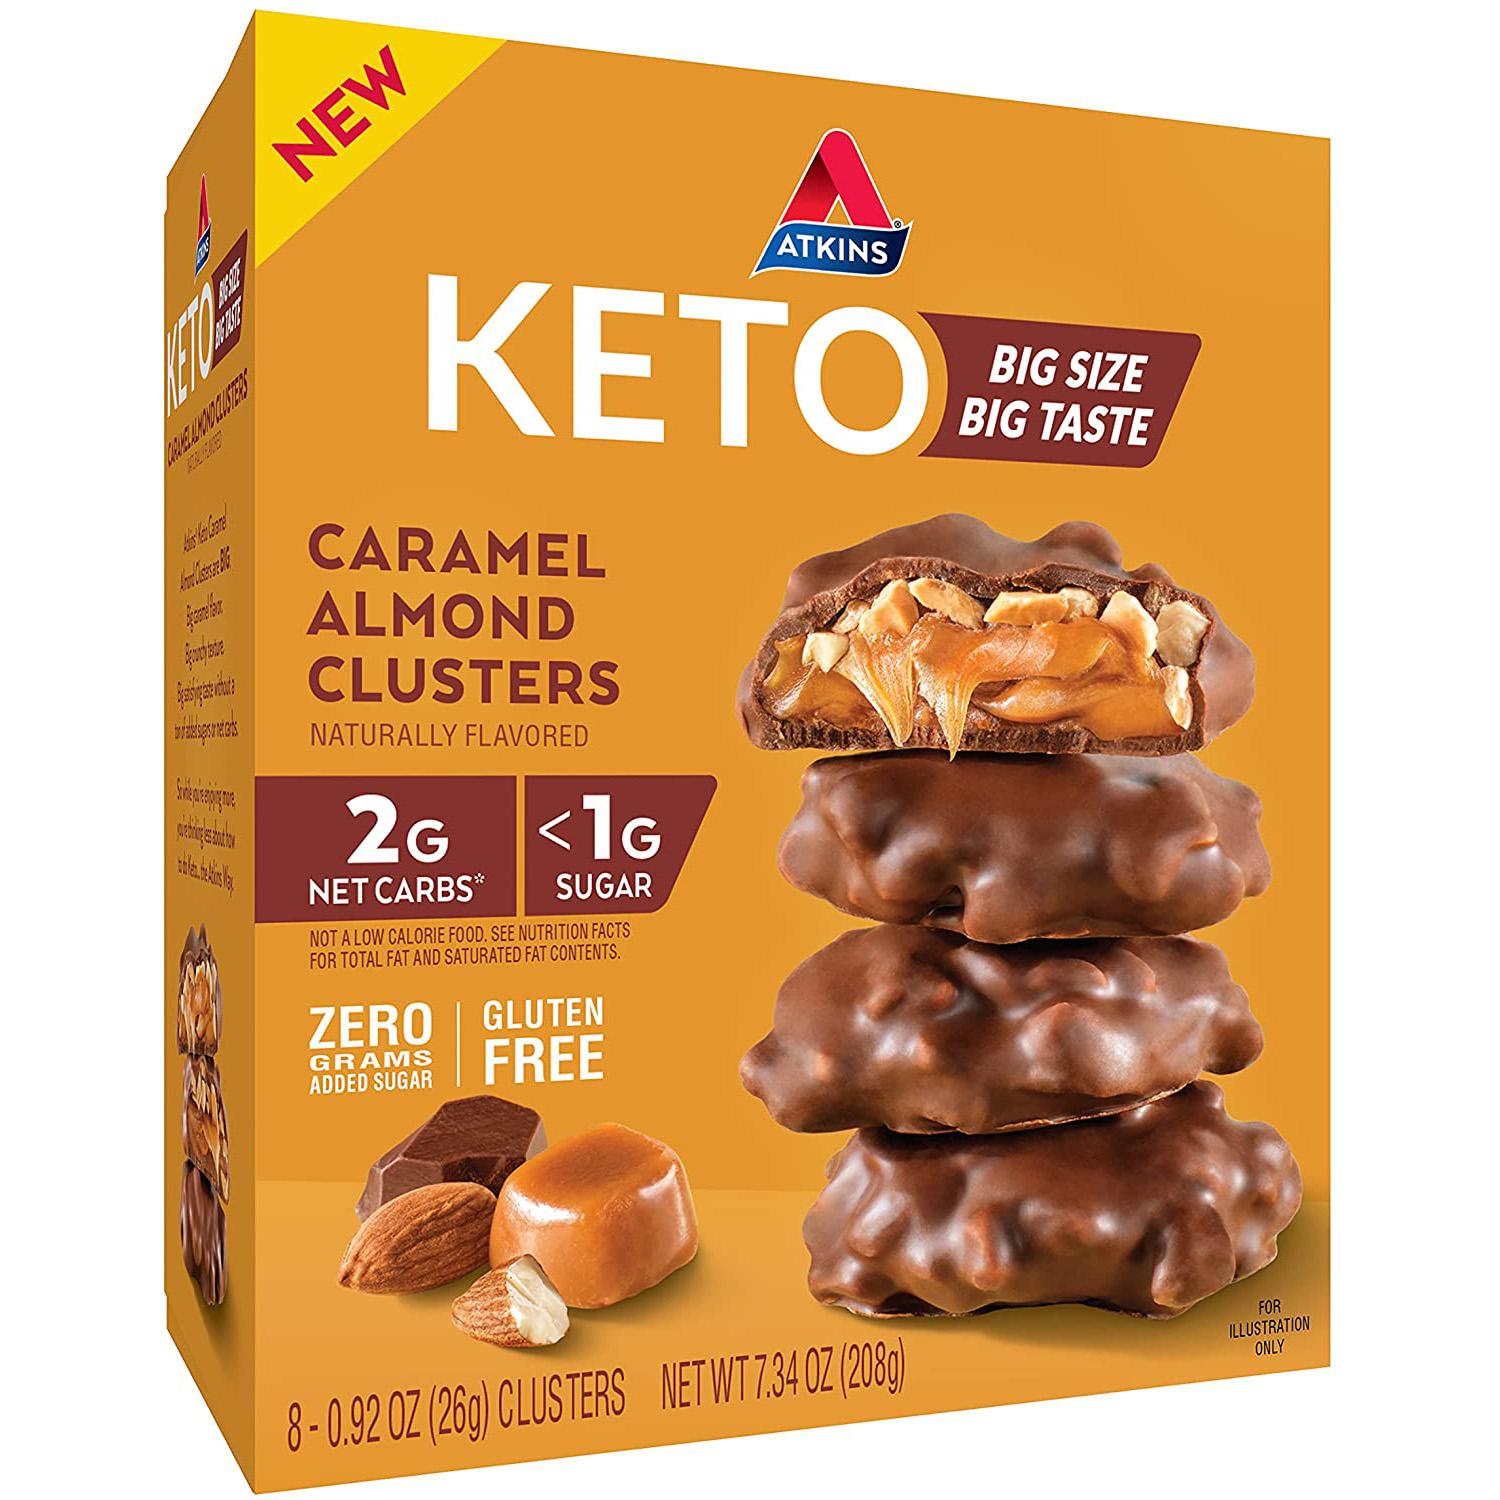 8 Atkins Keto Caramel Almond Clusters for $4.34 Shipped